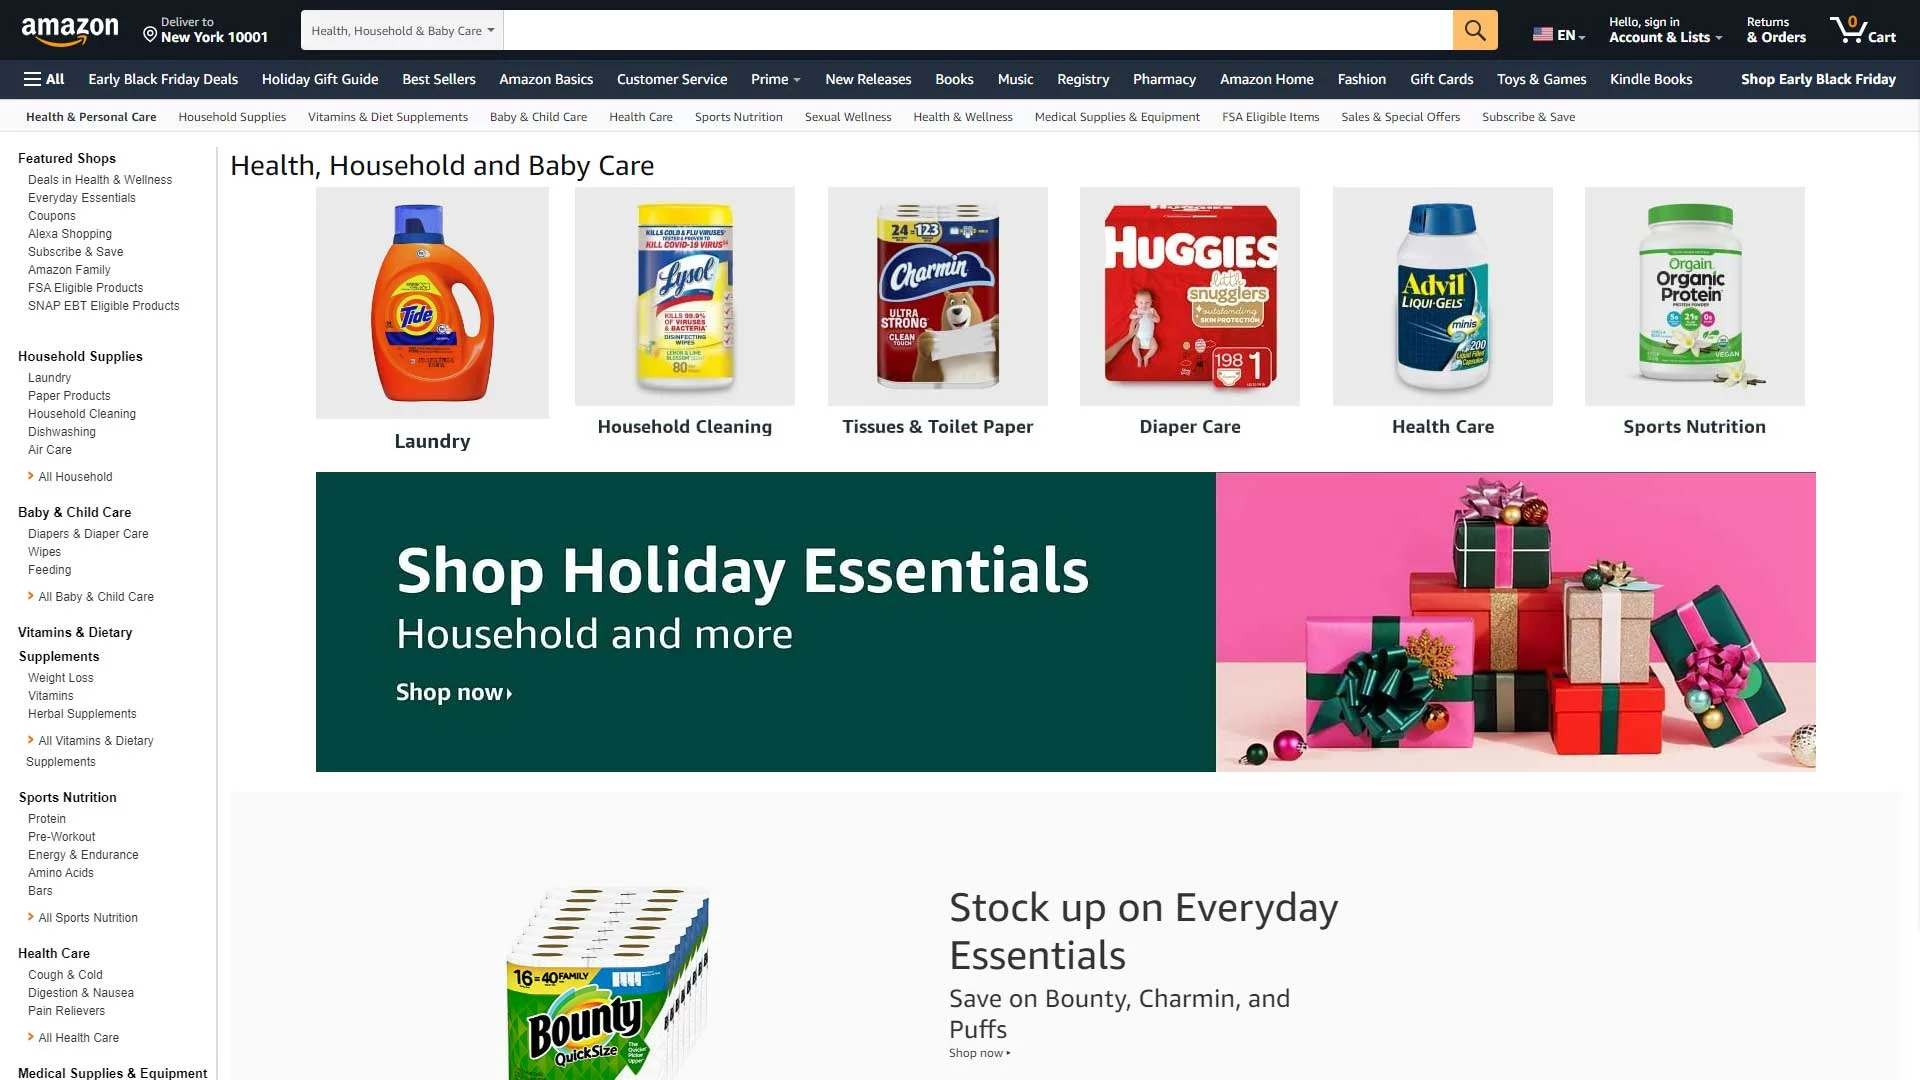 Health and Household jpg - Amazon FBA Marketplace Services